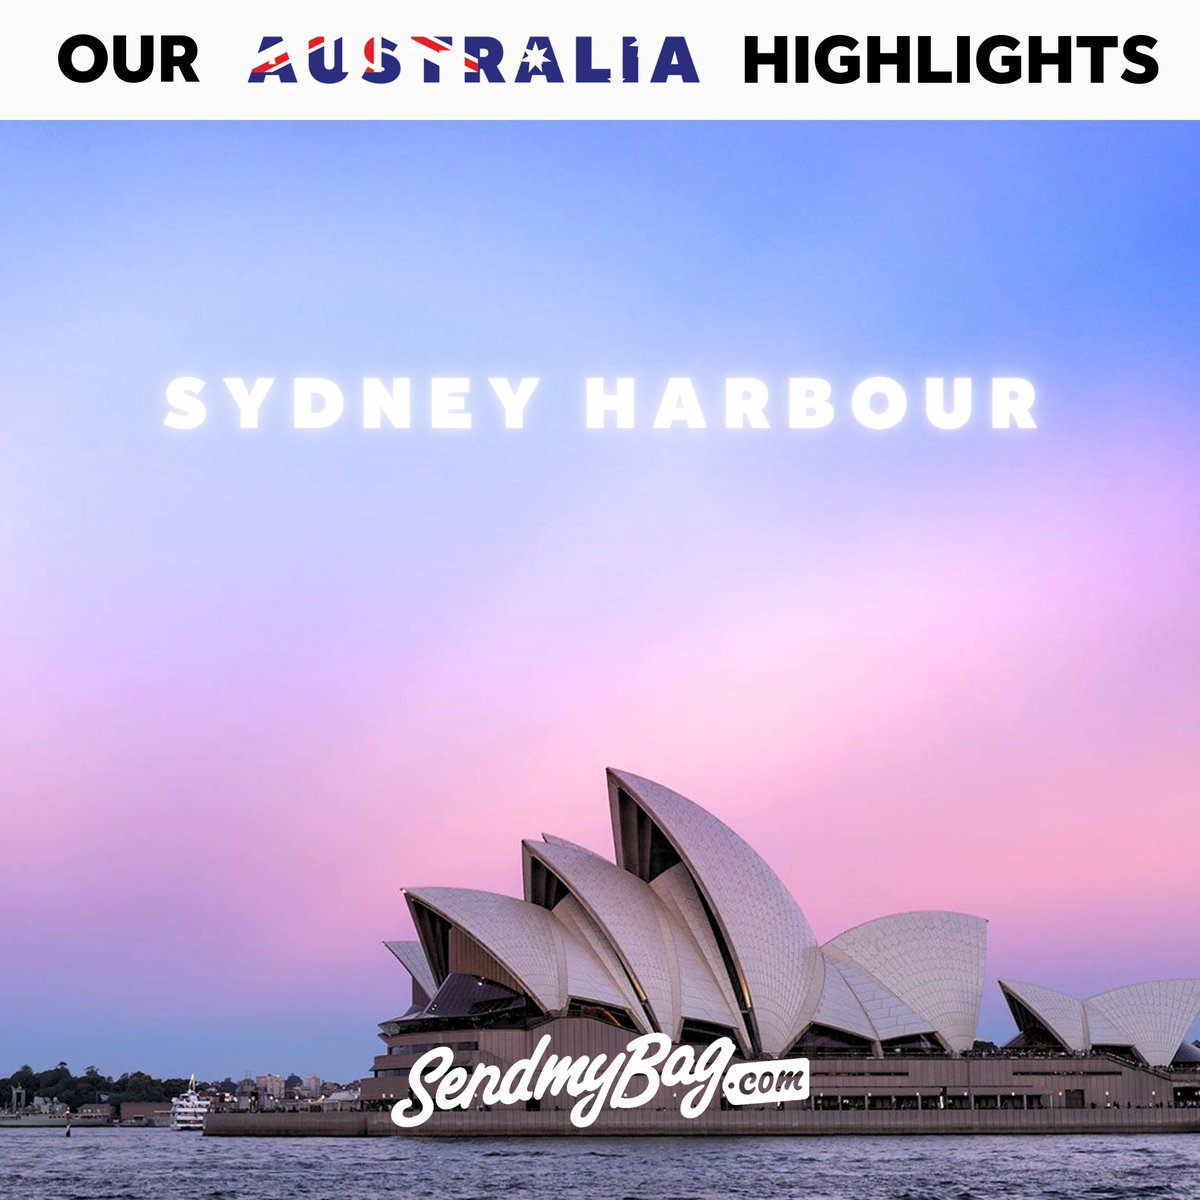 Australia is a land of staggering contrasts and spectacular beauty, here are a few of the highlights that we think everyone should see when they're in Australia 🇦🇺✈️

#SendMyBag #ExploreDownUnder #VisitAustralia #SeeAustralia #AussieWonders